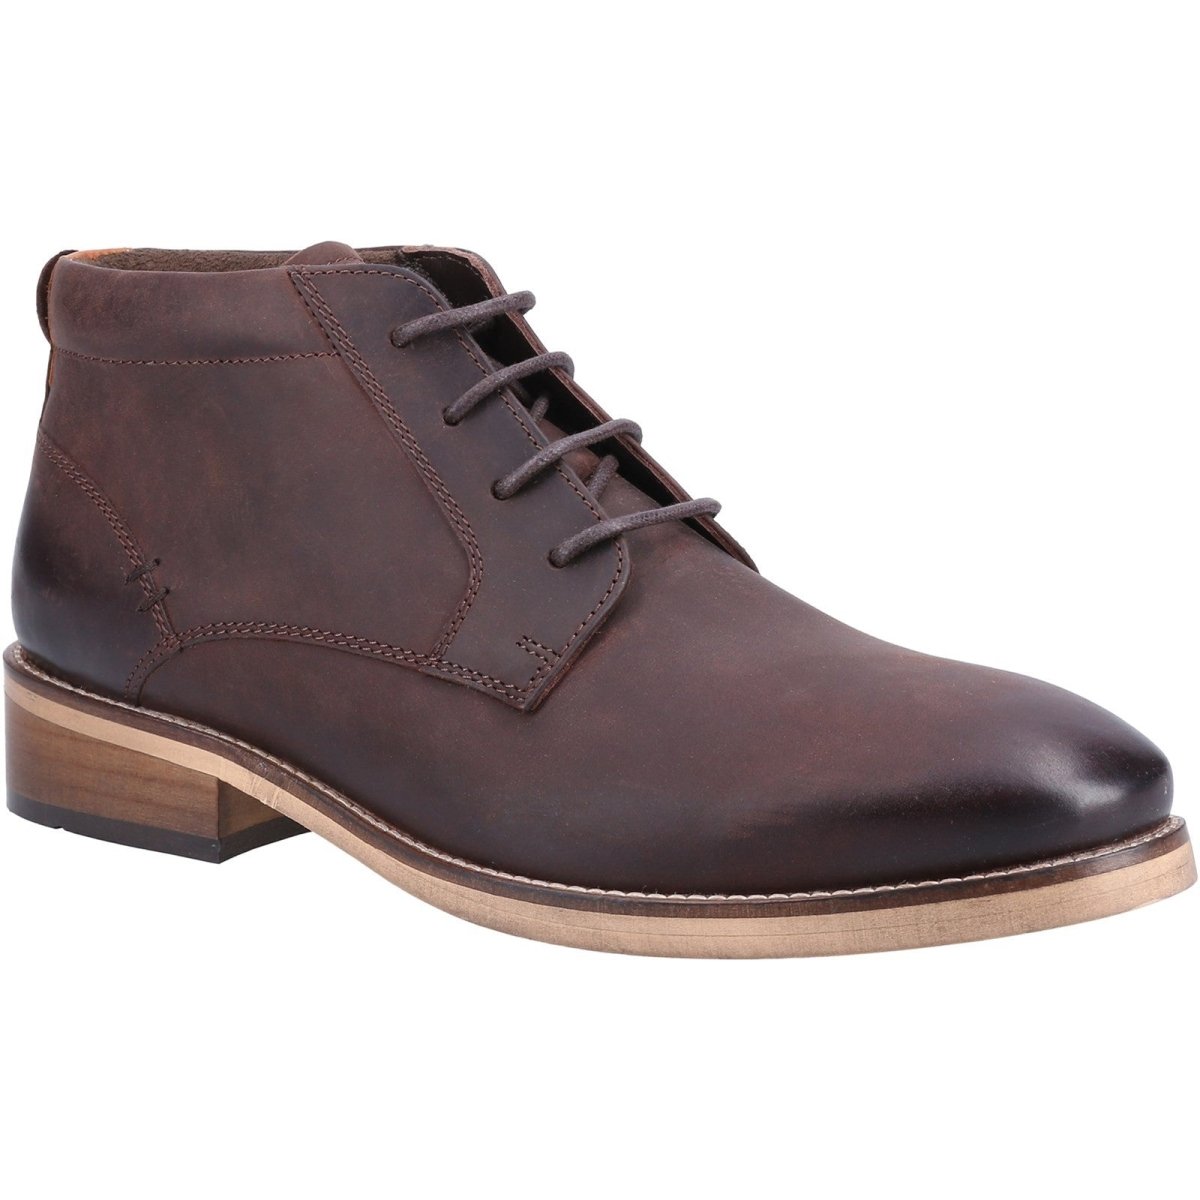 Cotswold Harescombe Boots - Shoe Store Direct